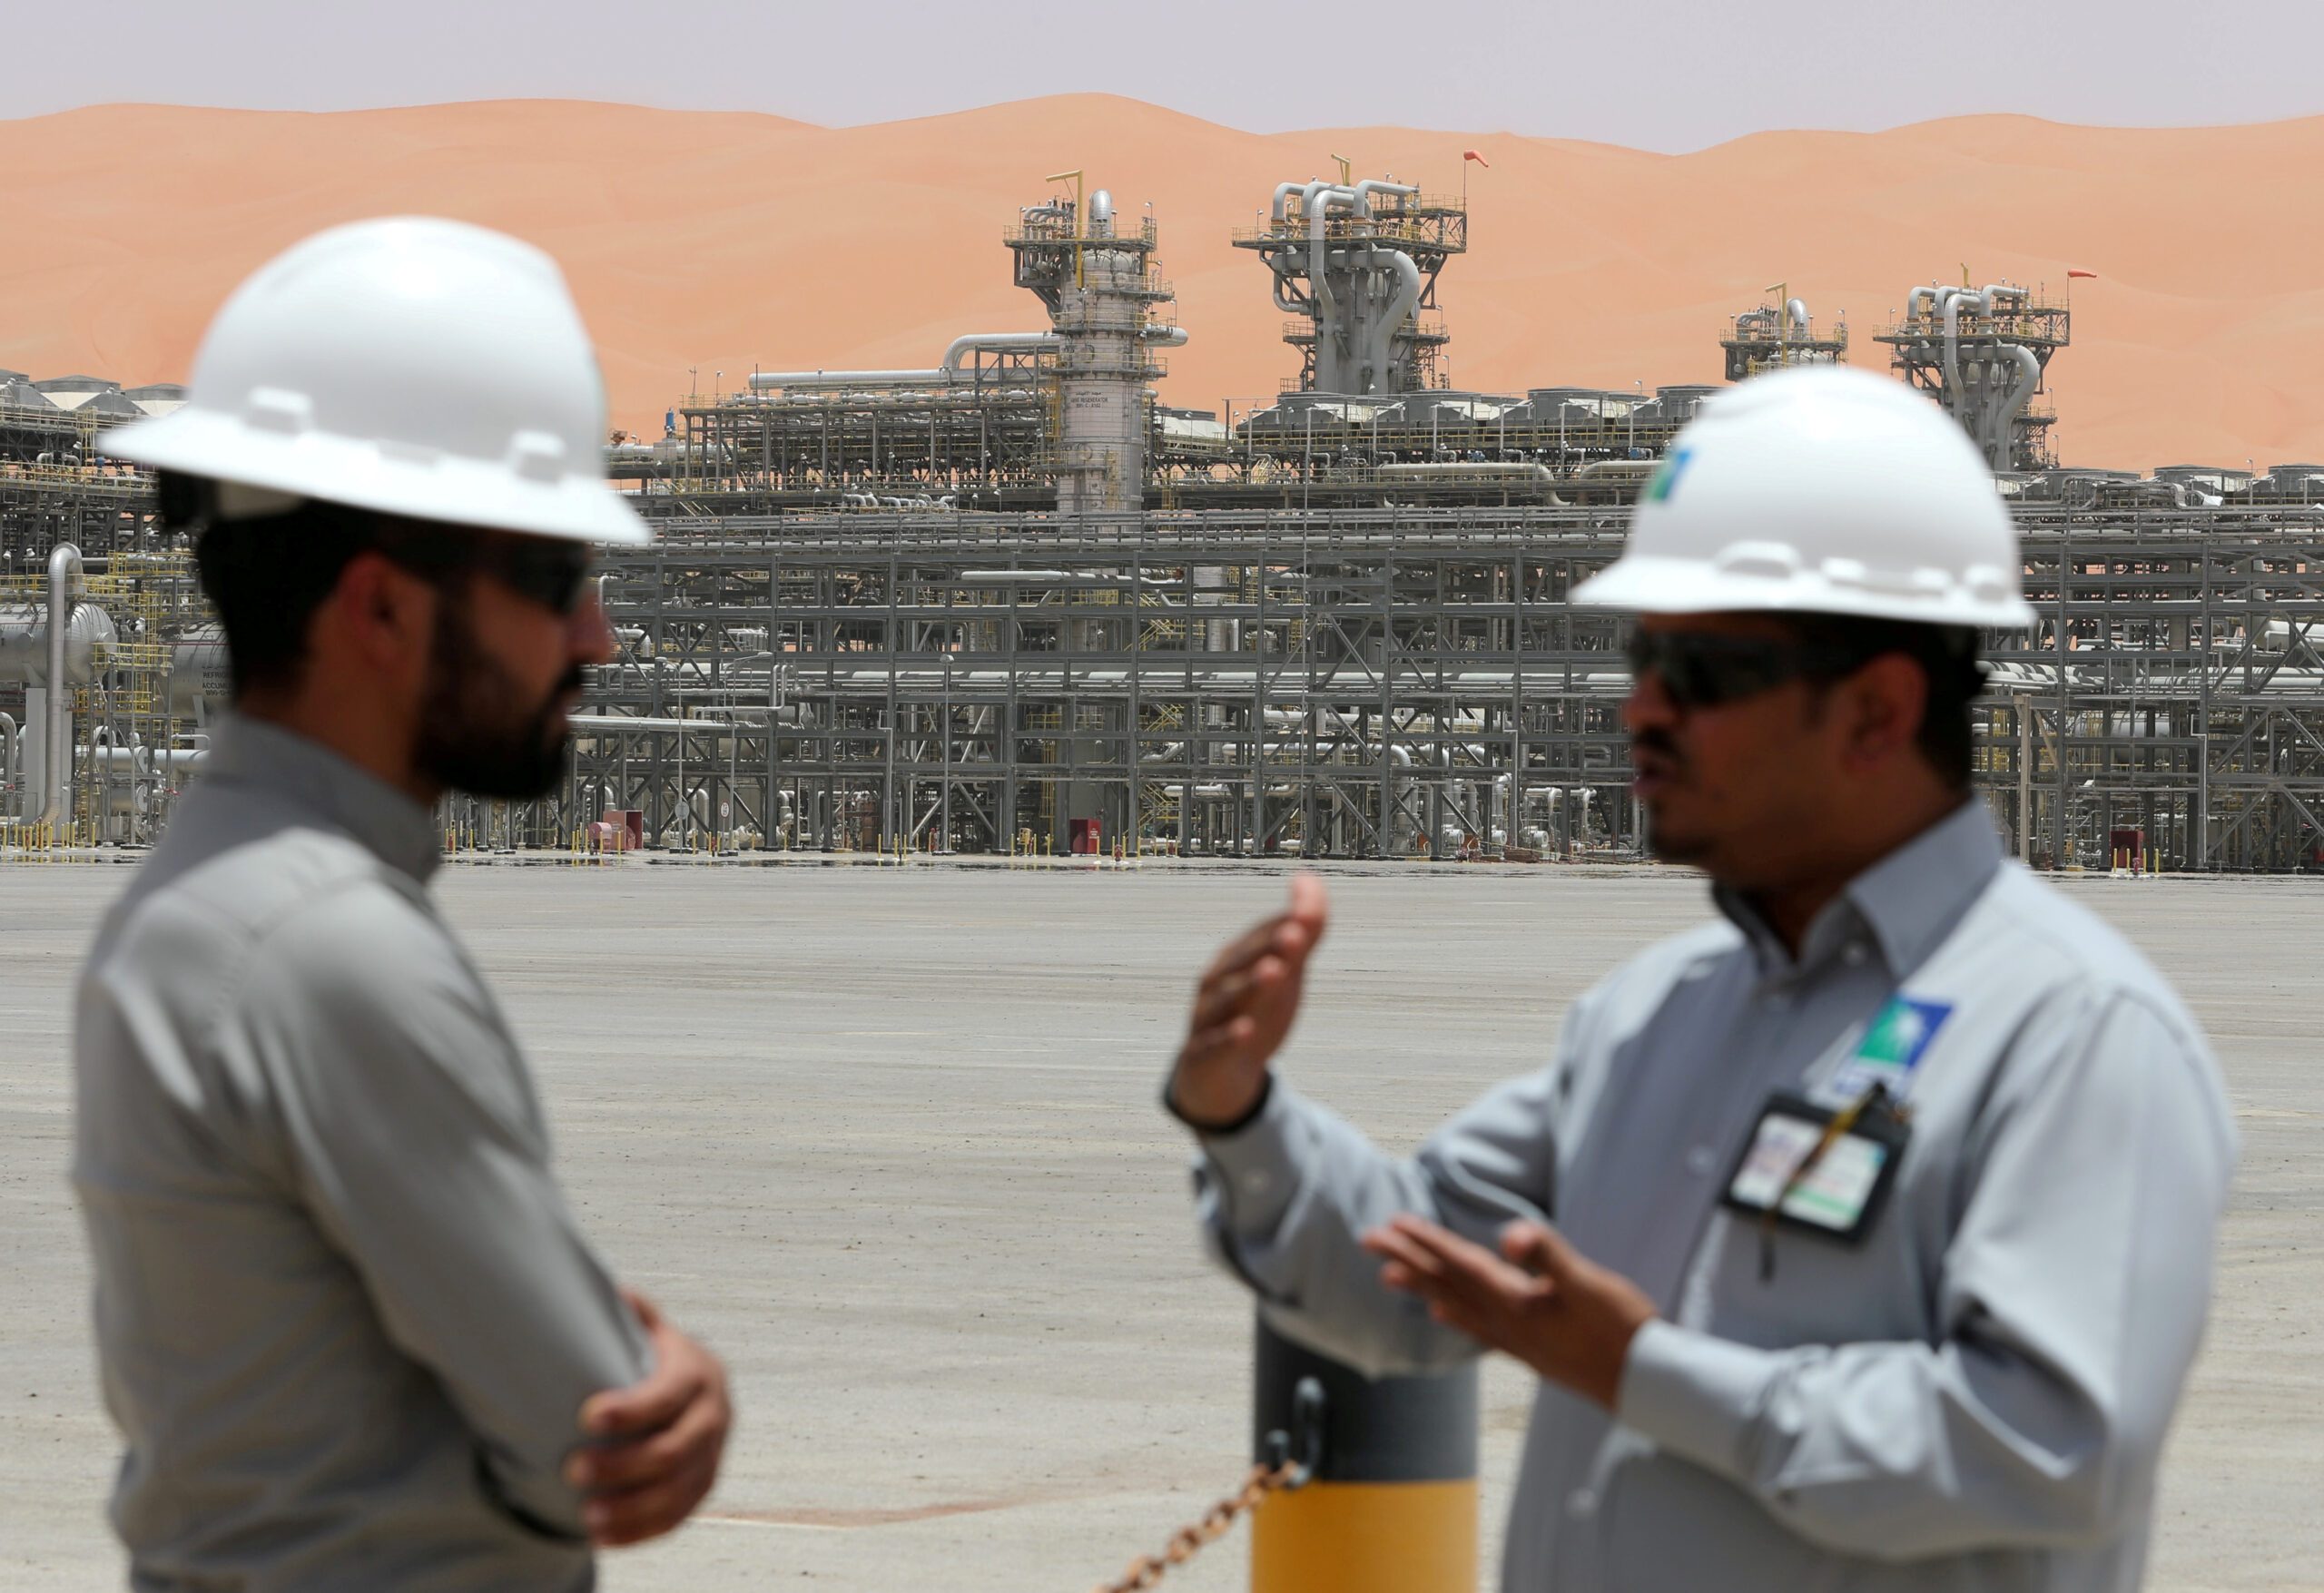 Saudi Aramco employees on site. Indian Oil and Bharat Petroleum plan to import an additional one million bpd each from Saudi Aramco